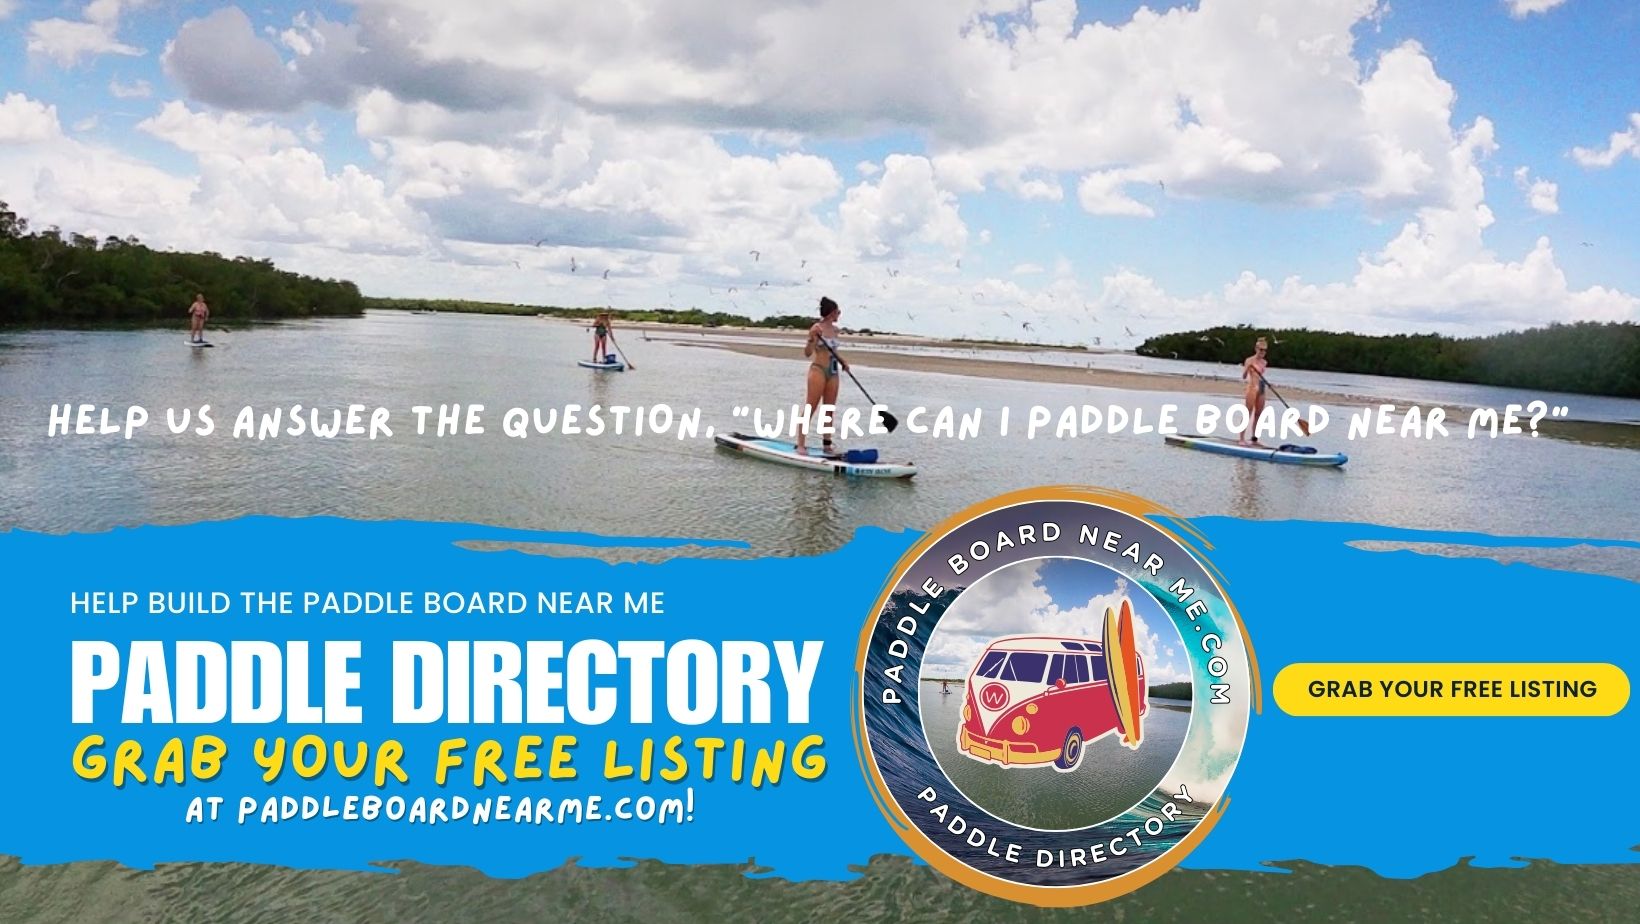 paddle boarding near me directory graphic